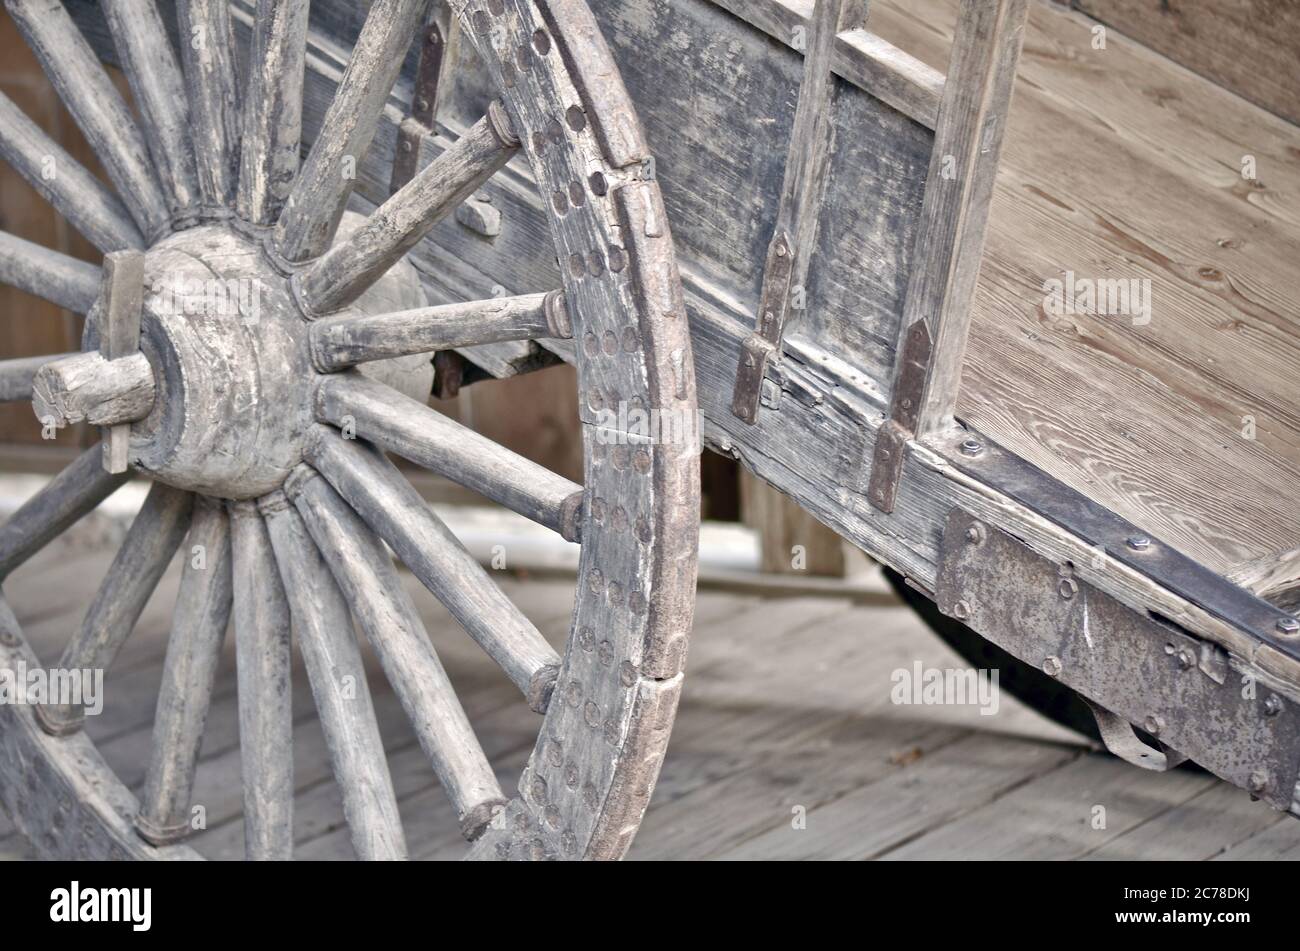 Southeast Asian Hand Pulled Wooden Delivery Cart Wheel Close Up Stock Photo